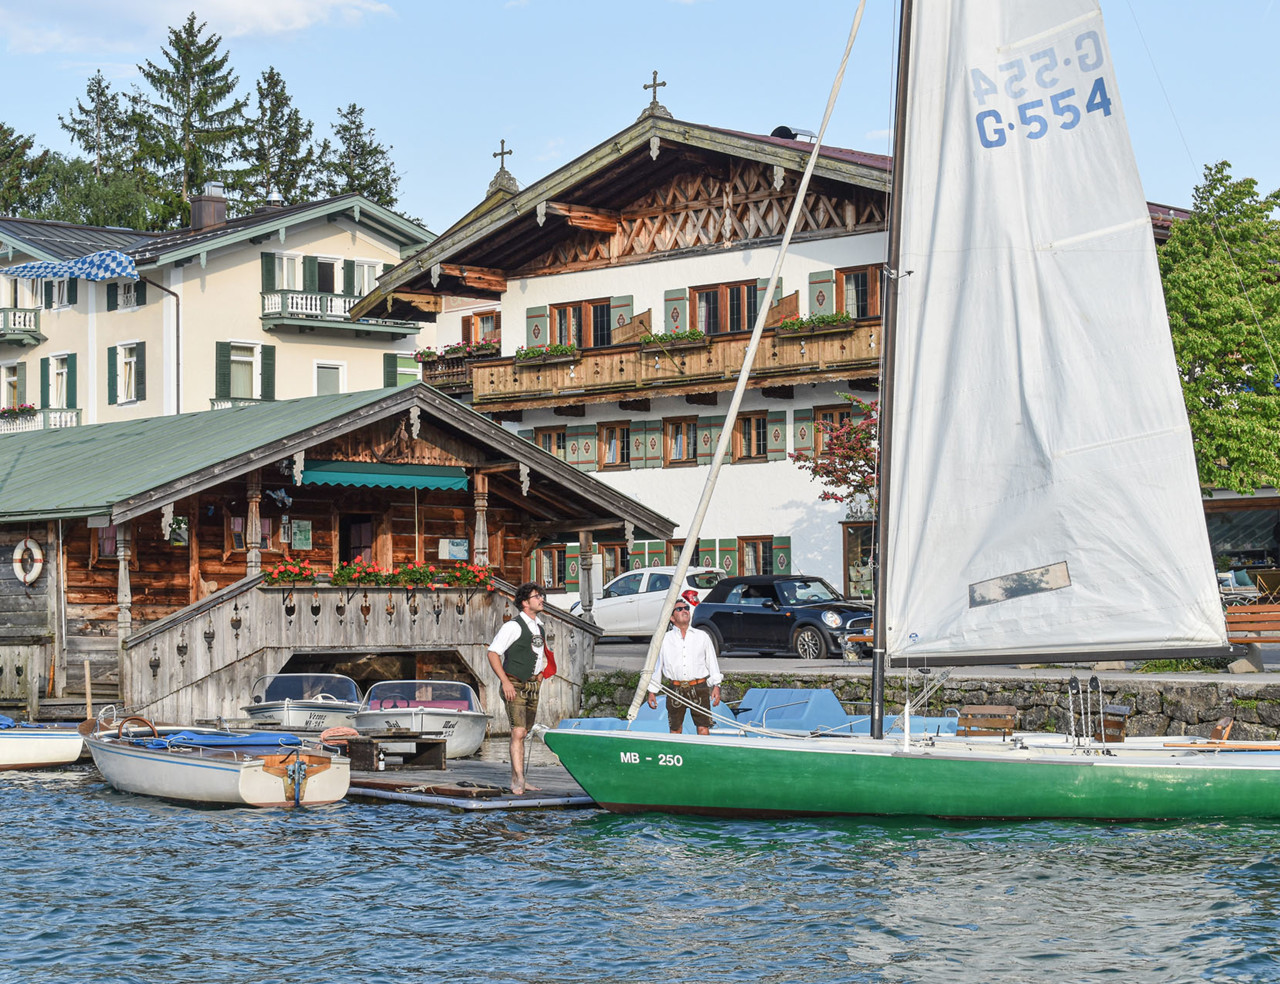 Our sailboats on Lake Tegernsee